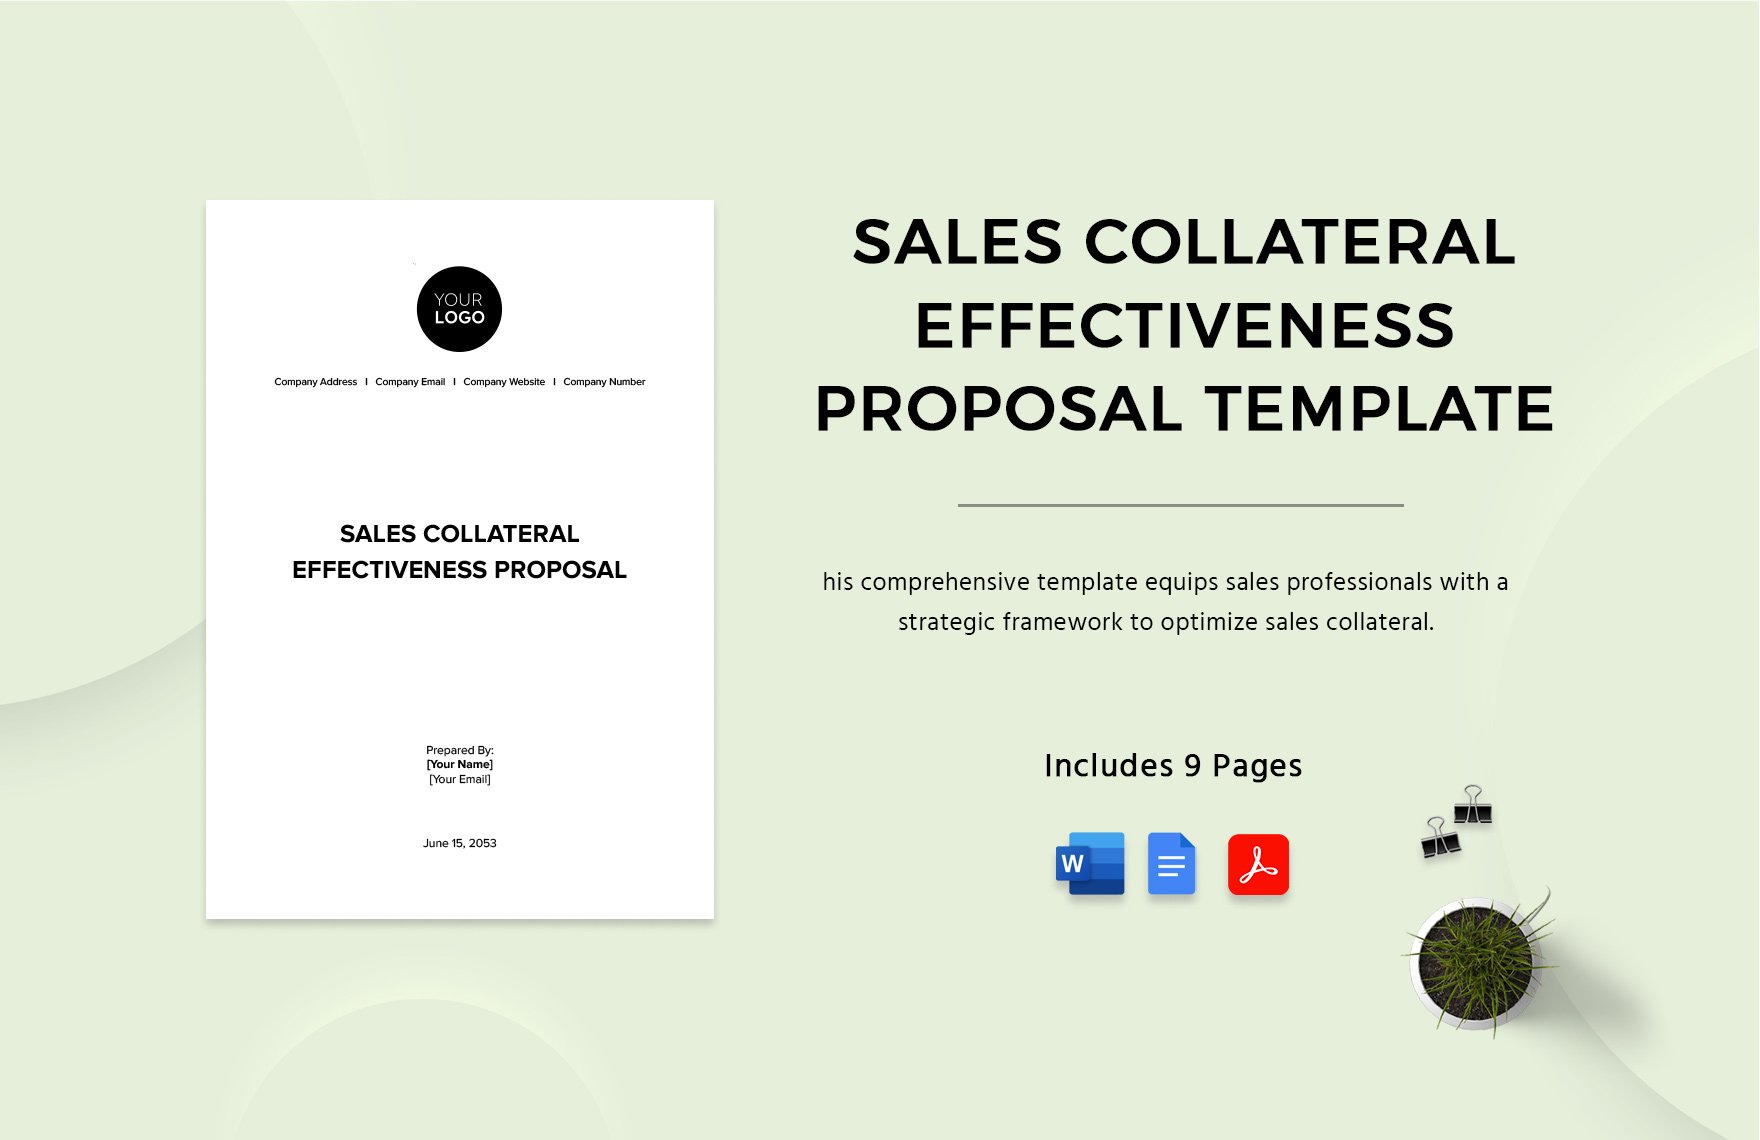 Sales Collateral Effectiveness Proposal Template in Word, Google Docs, PDF